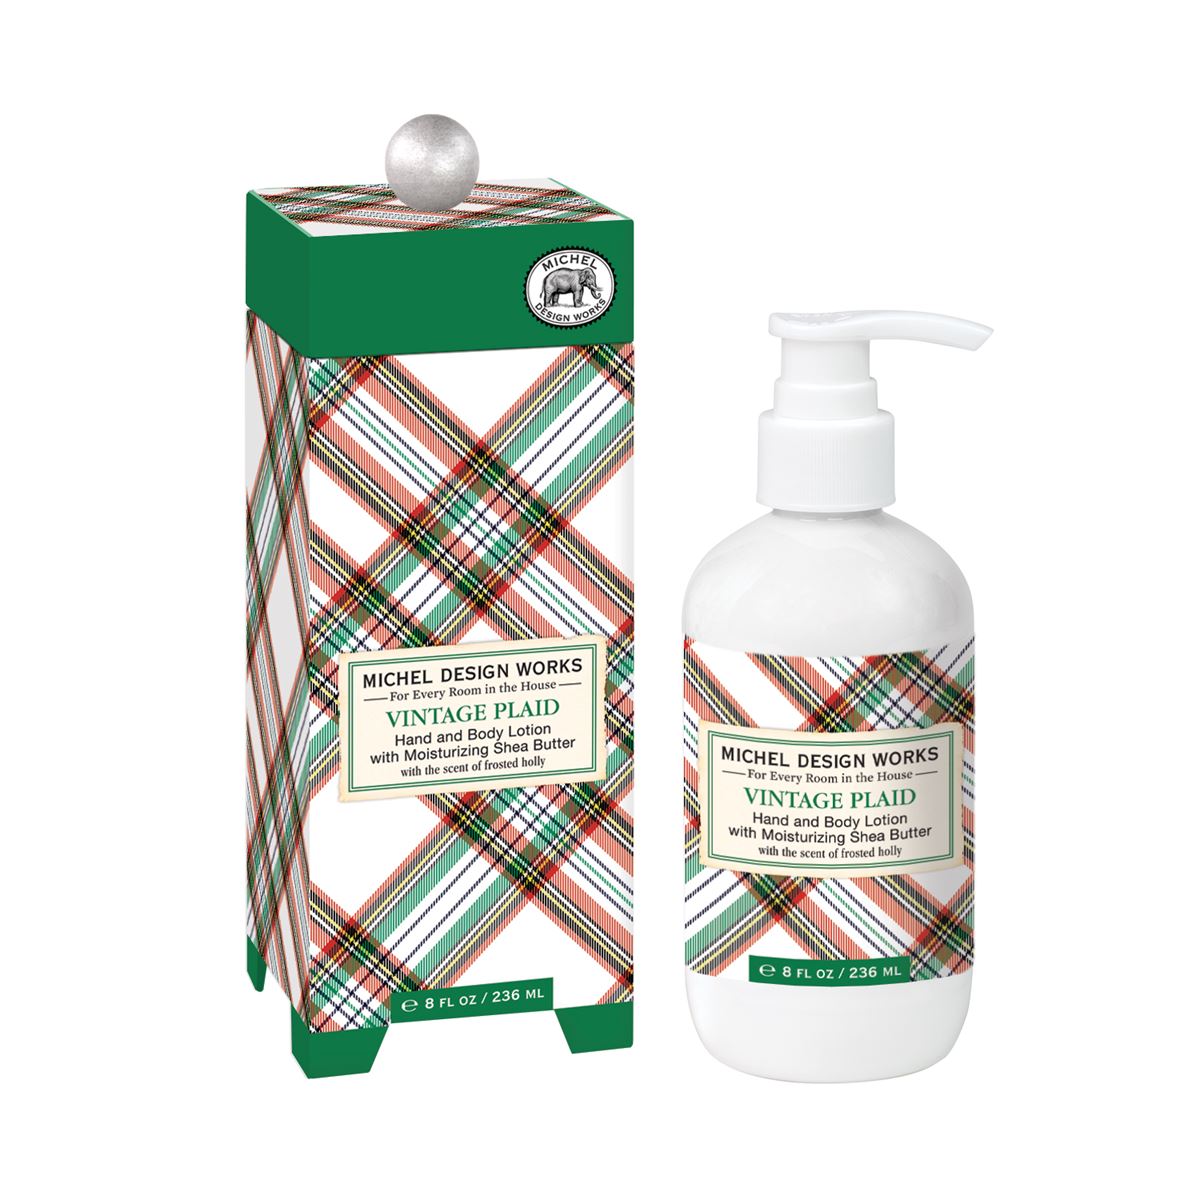 MICHEL DESIGN WORKS Vintage Plaid Lotion Silky Hand and Body Elixir with Shea Butter and Botanical Infusion